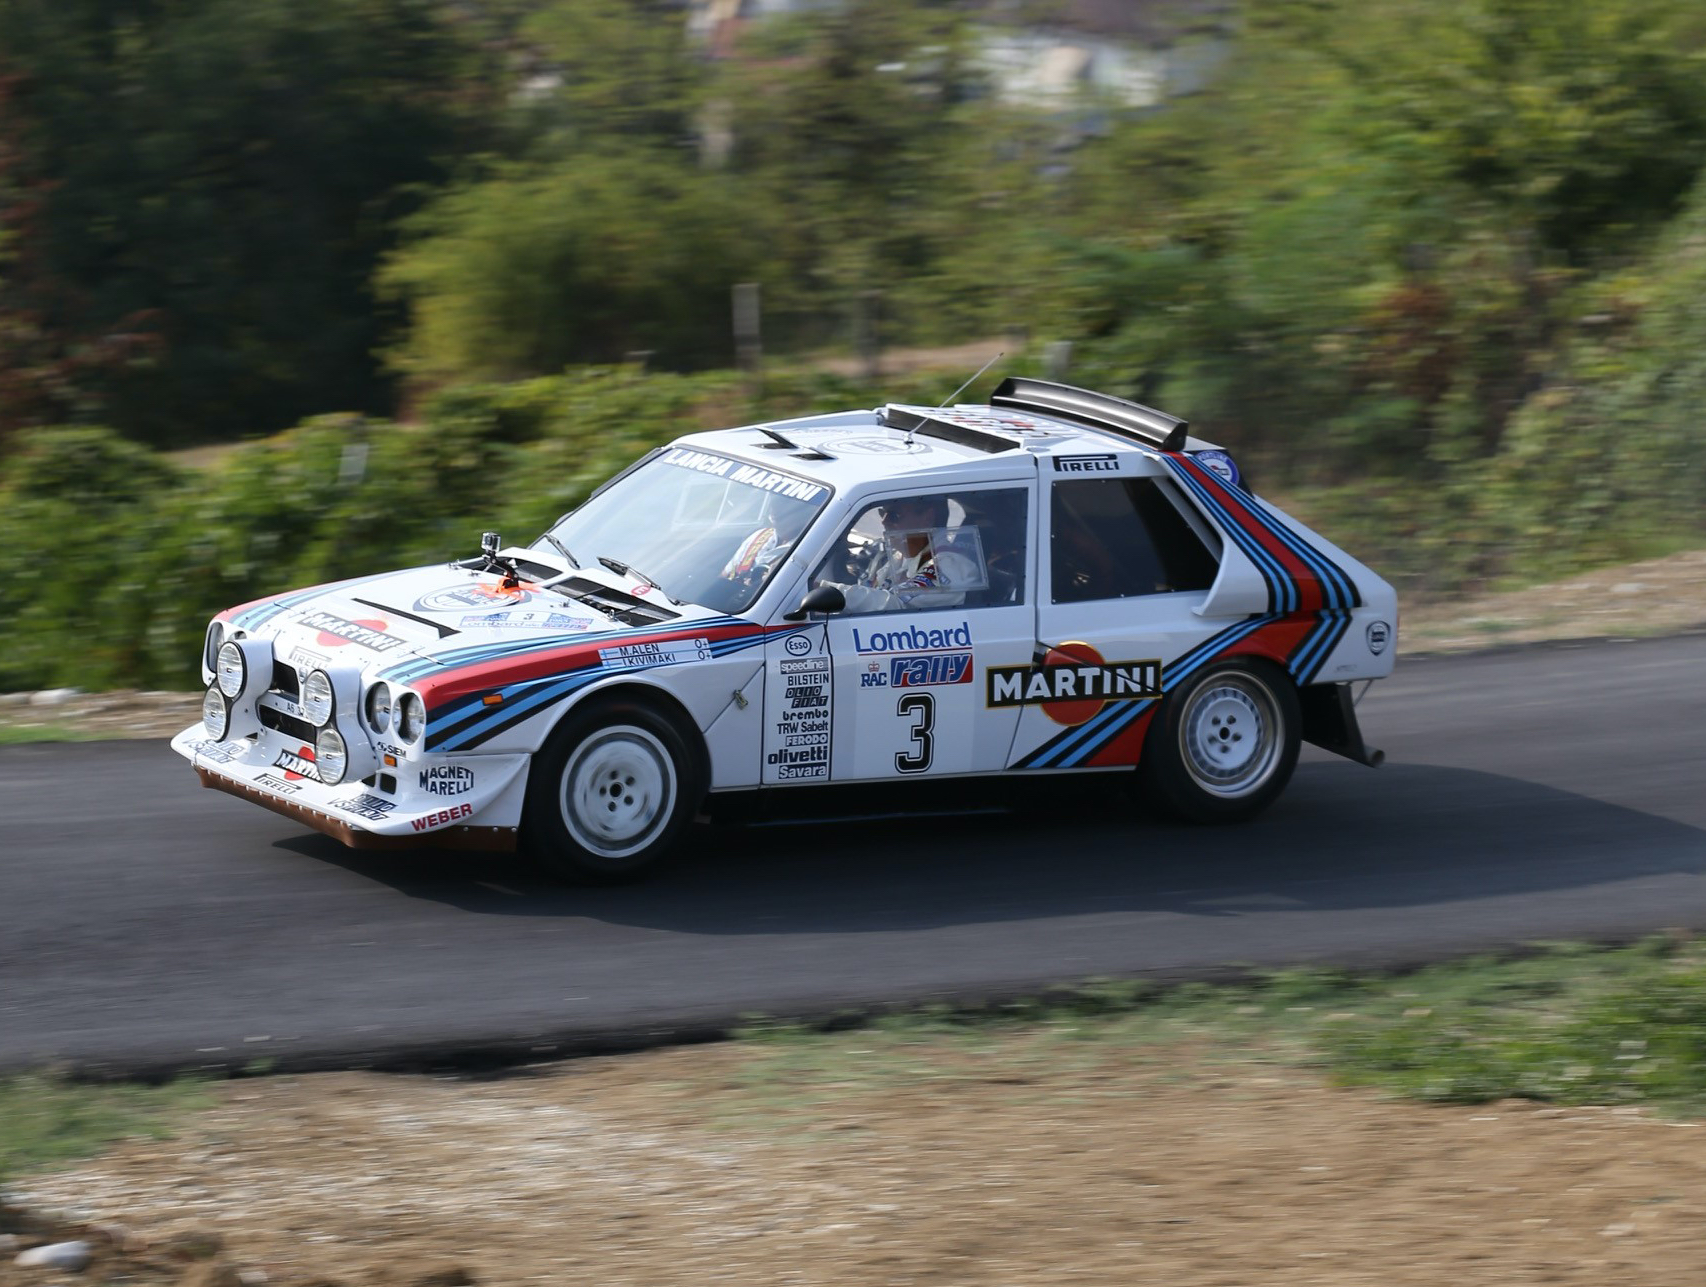 200723 1985 Lancia Delta S4 (Credit – ©2020 Courtesy of RM Sotheby's)